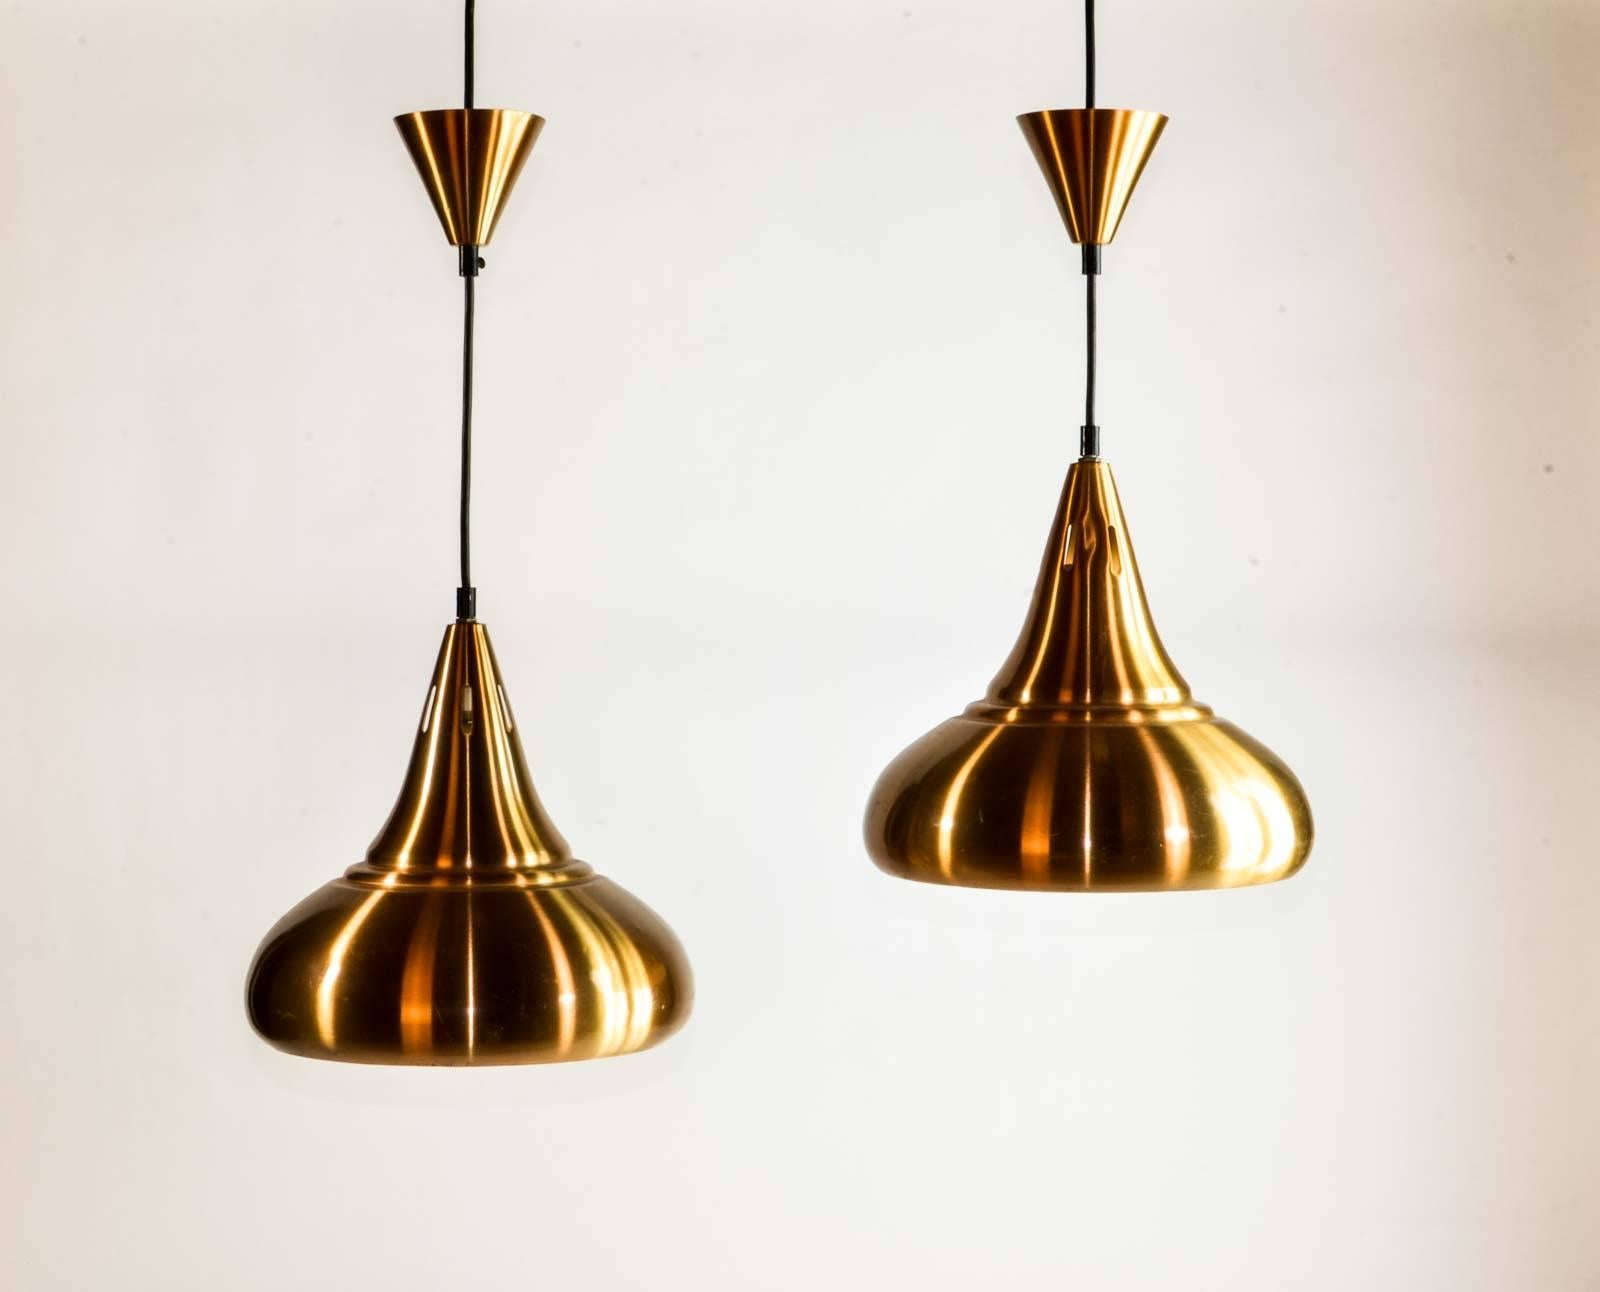 Pair of copper midcentury drop shaped pendants in the style of Jo Hammerborg.
This elegant copper pair was manufactured probably in Denmark in the 1960s. They show the same features as the designs of Jo Hammerborg for Fog and Mørup. The pair is in